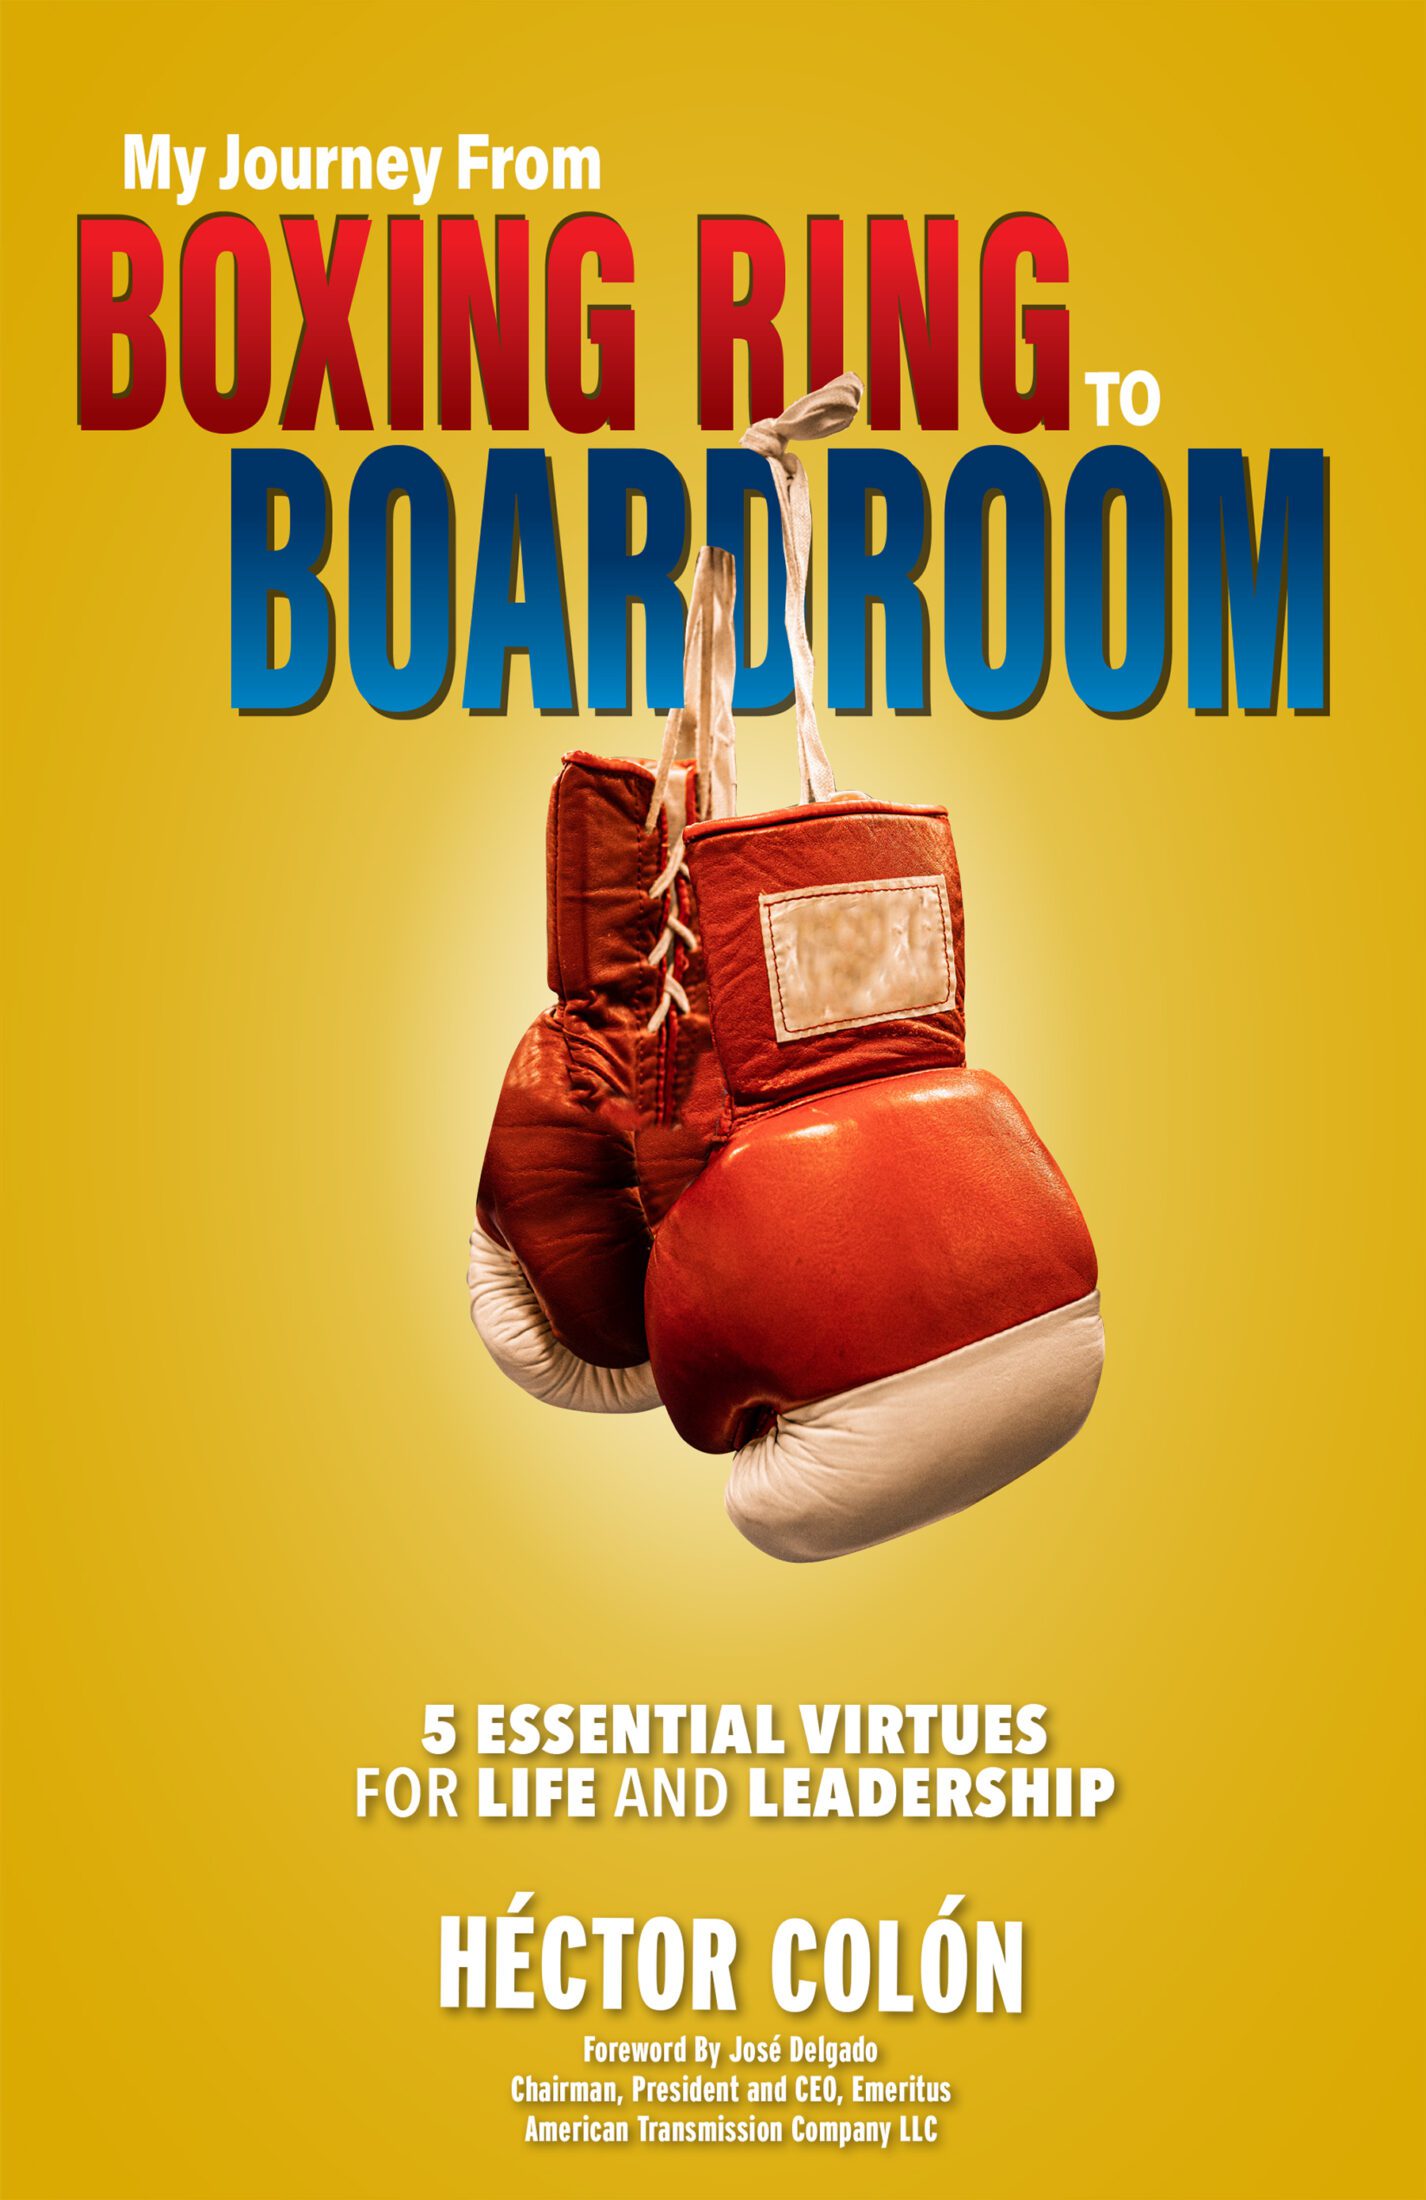 From Boxing Ring to Boardroom